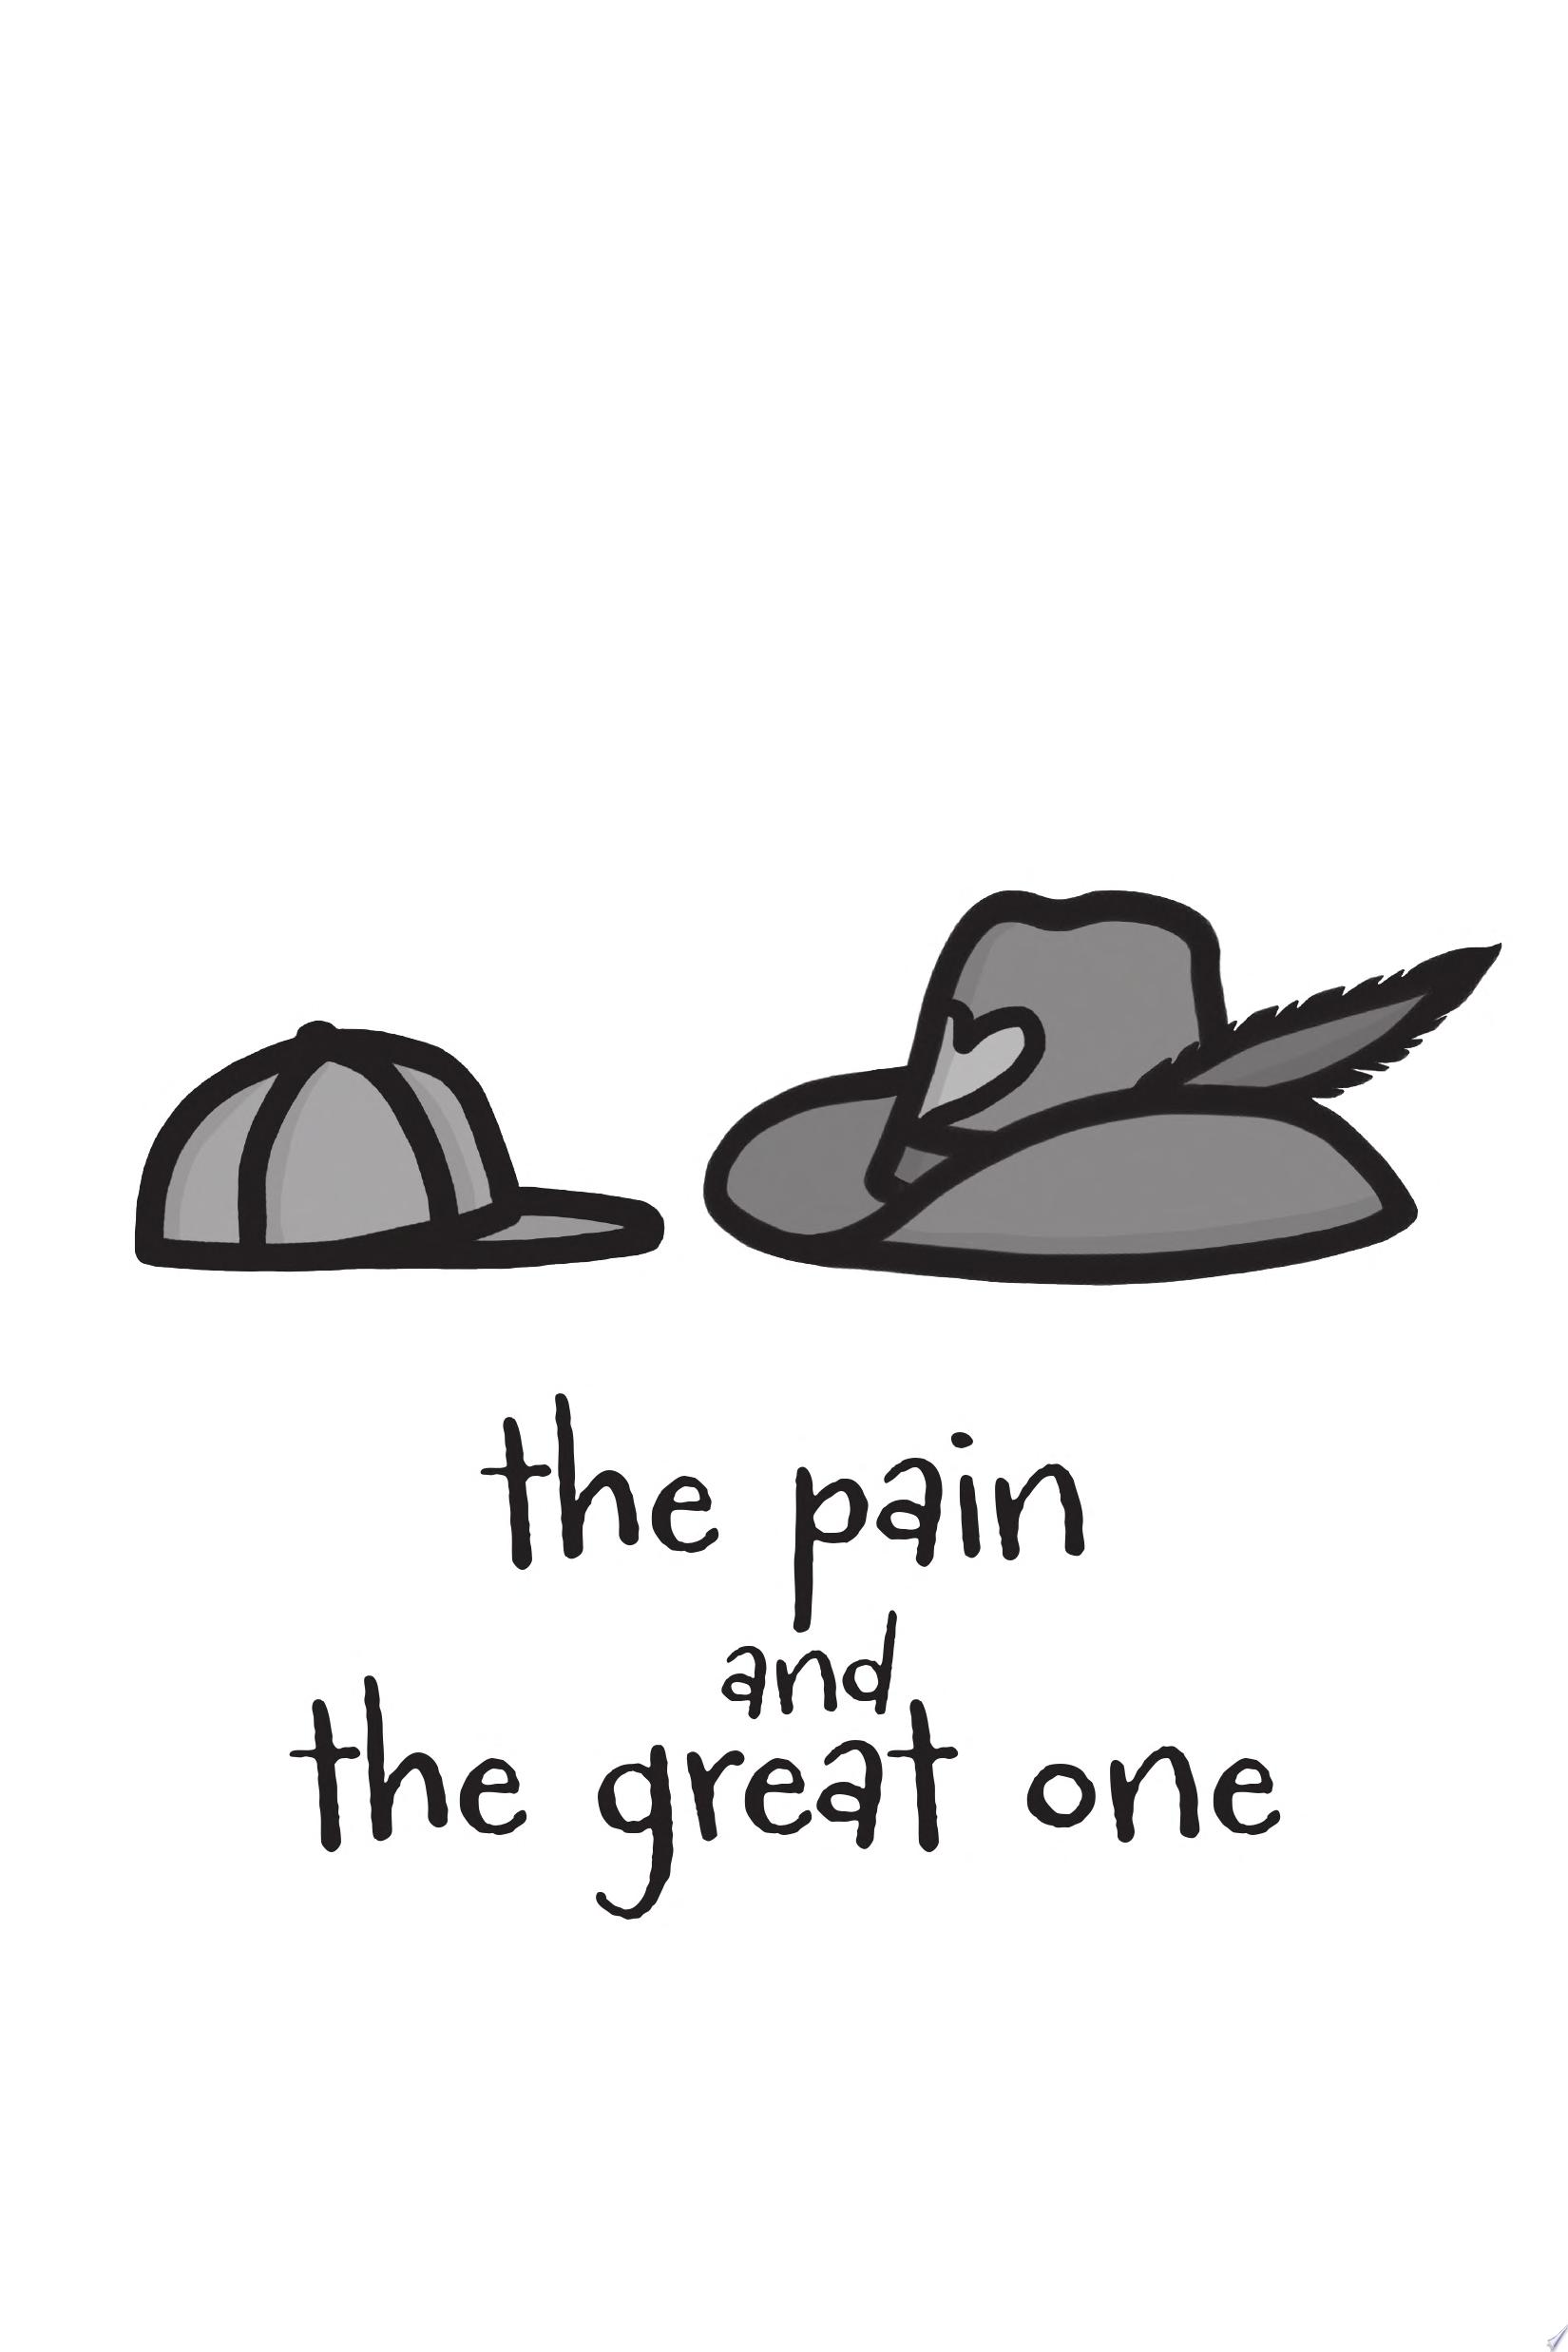 Image for "The Pain and the Great One"